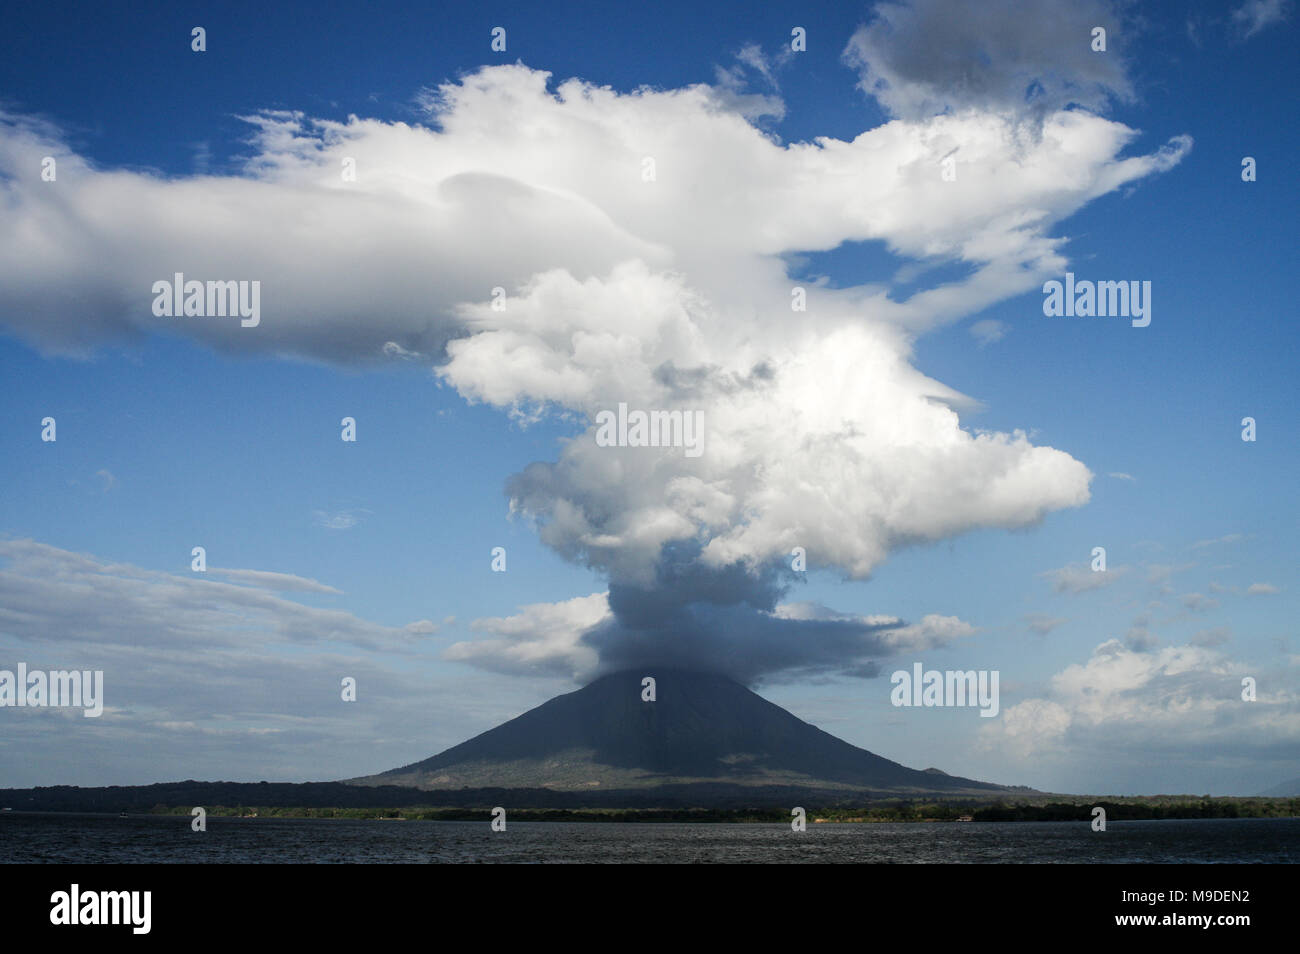 Cloud formation over Concepcion volcano on Ometepe Island in Nicaragua, Central America Stock Photo